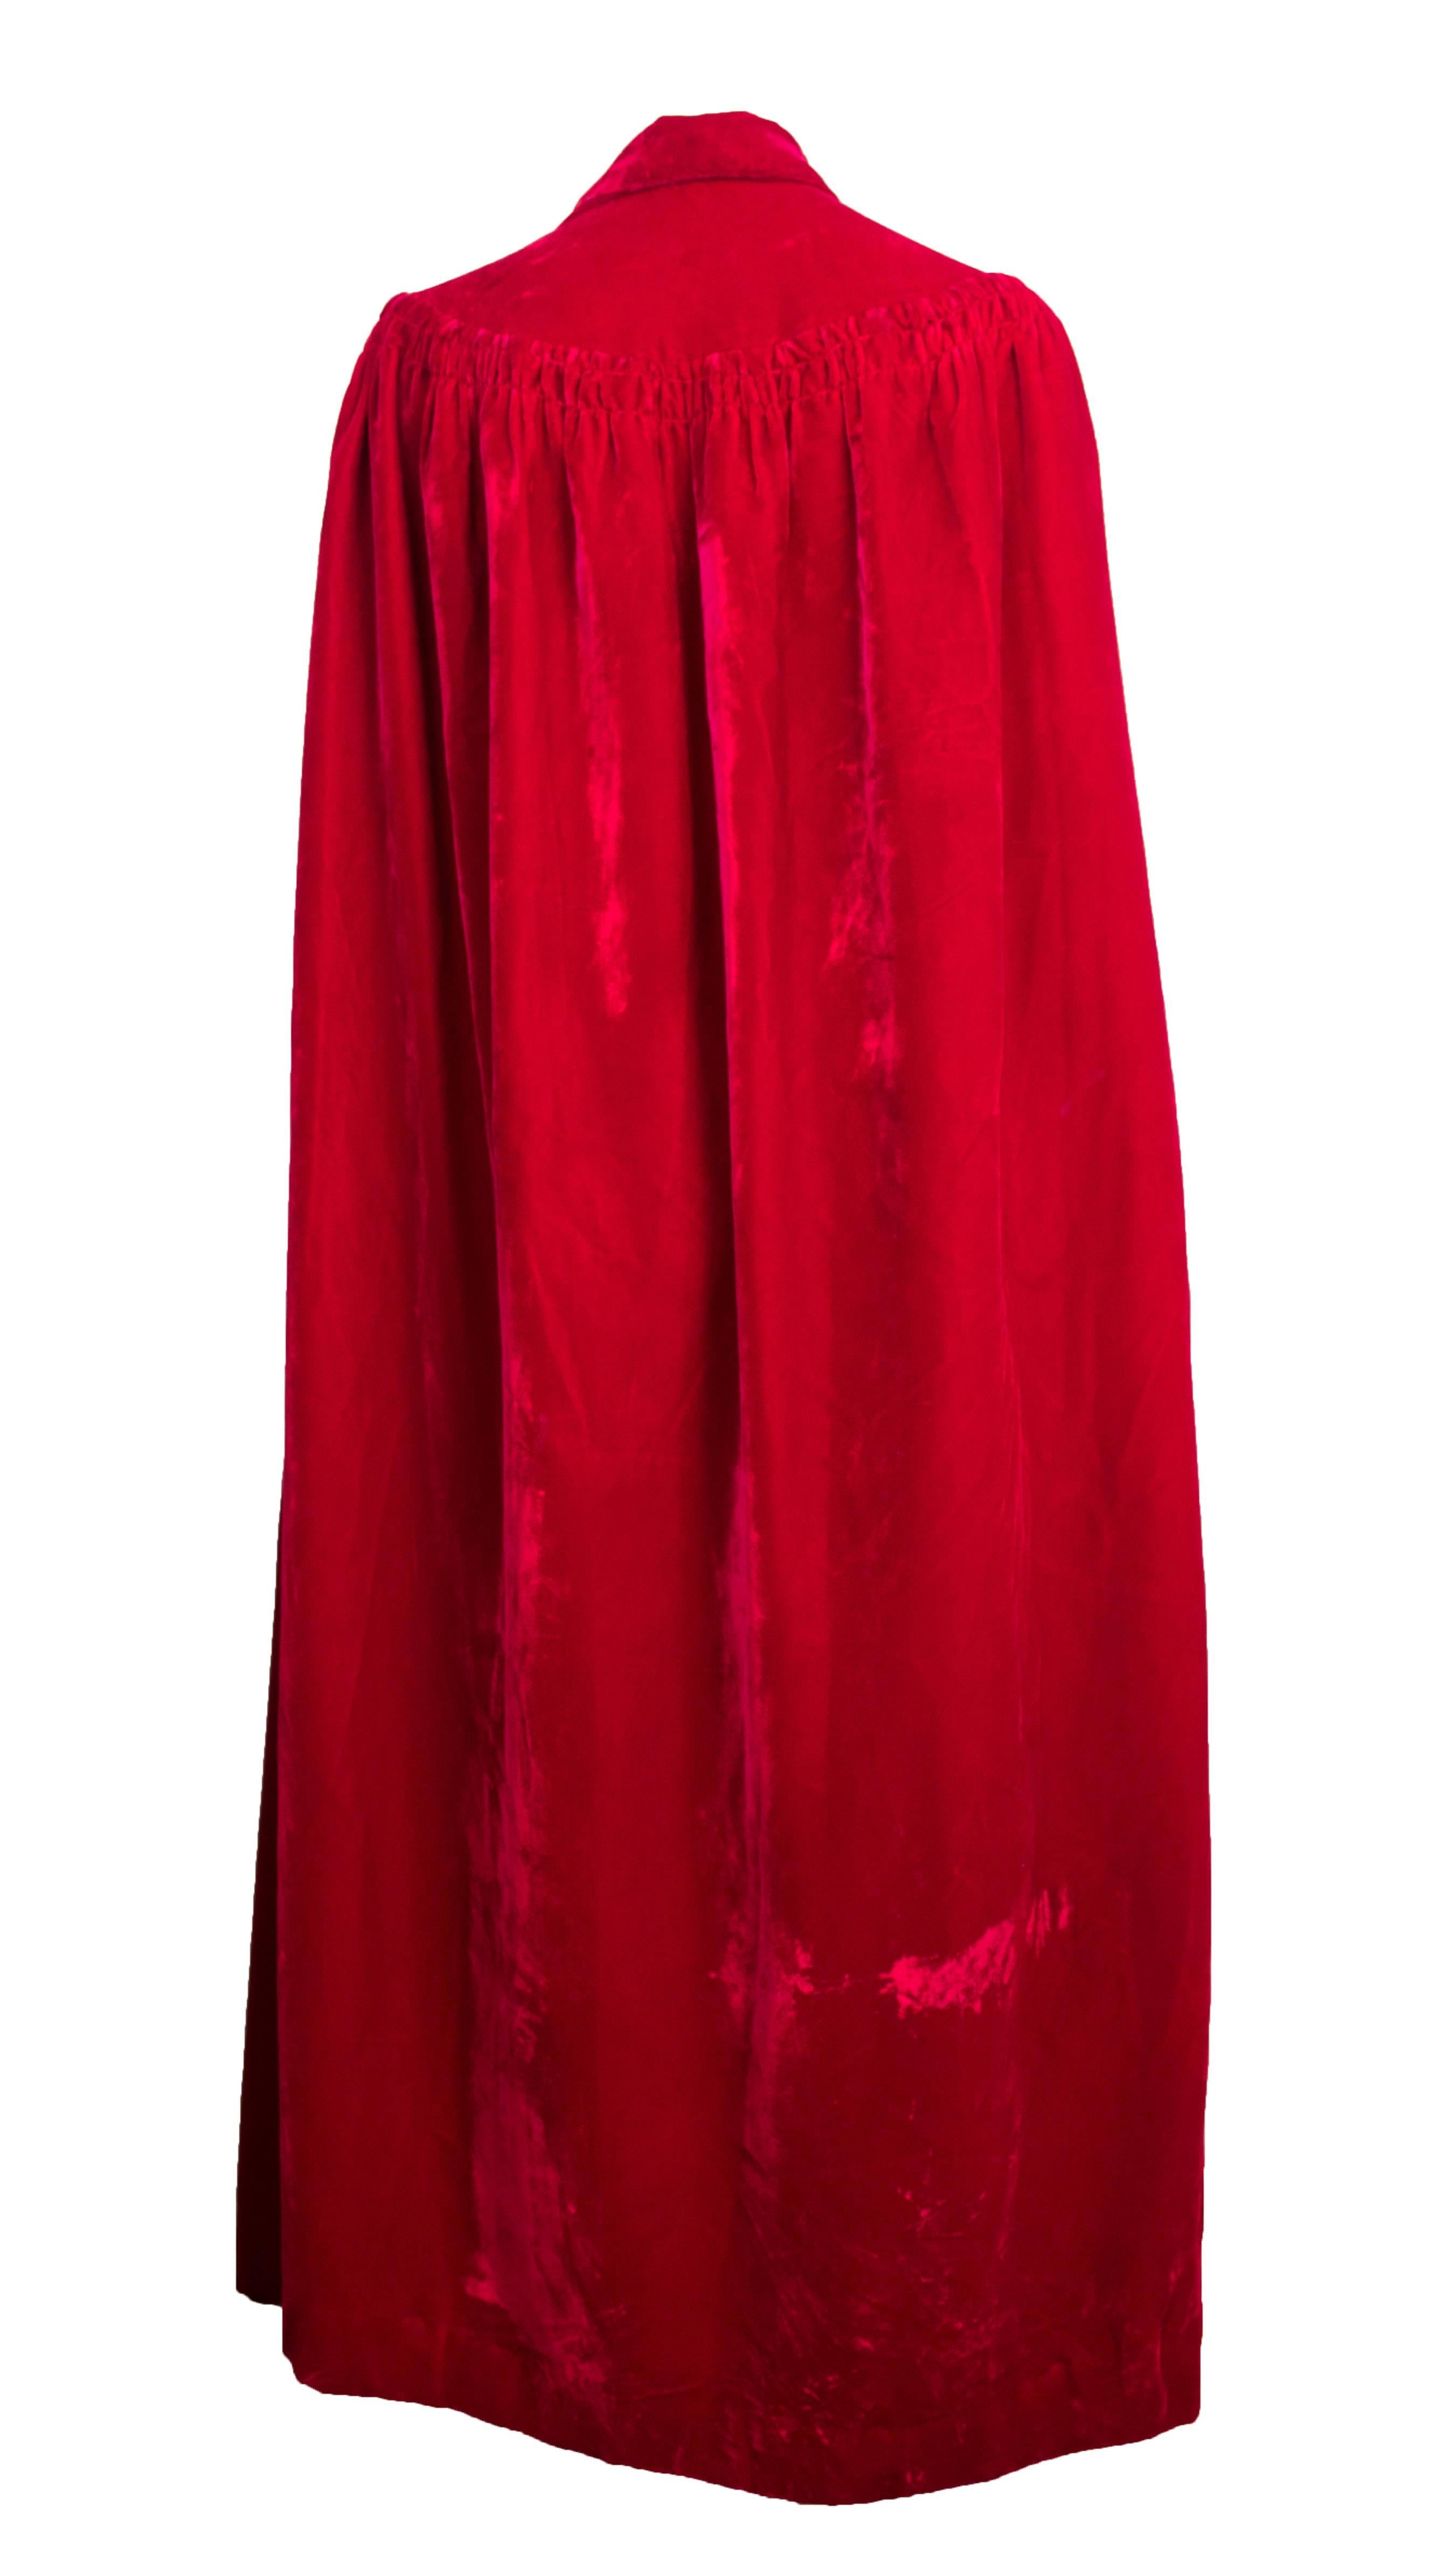 50s red velvet full length cape. Attached neck ties. Fully lined in cream colored fabric